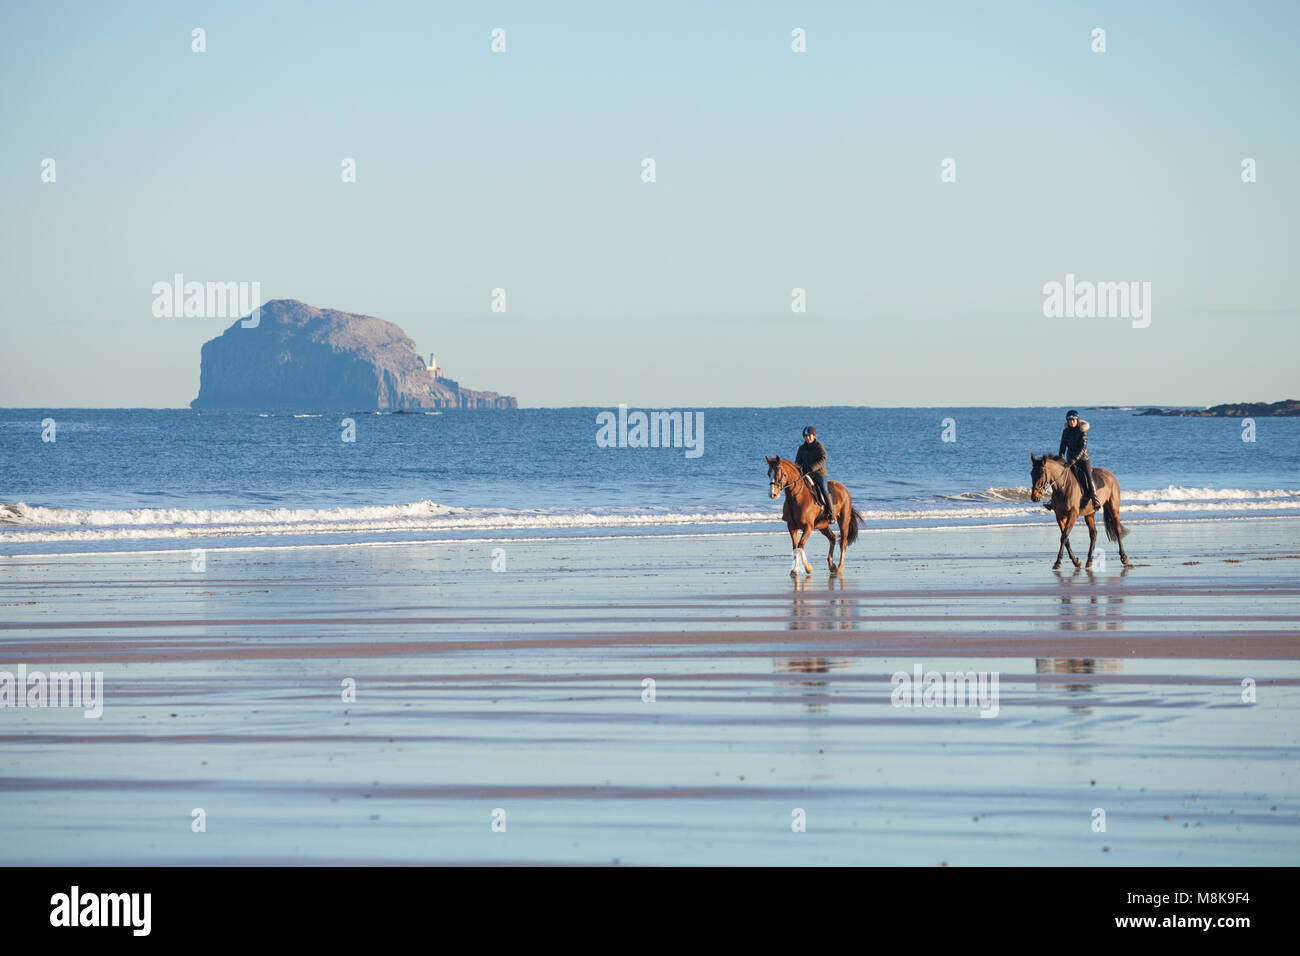 Two horse riders riding their horses on the beach at North Berwick Scotland. Stock Photo